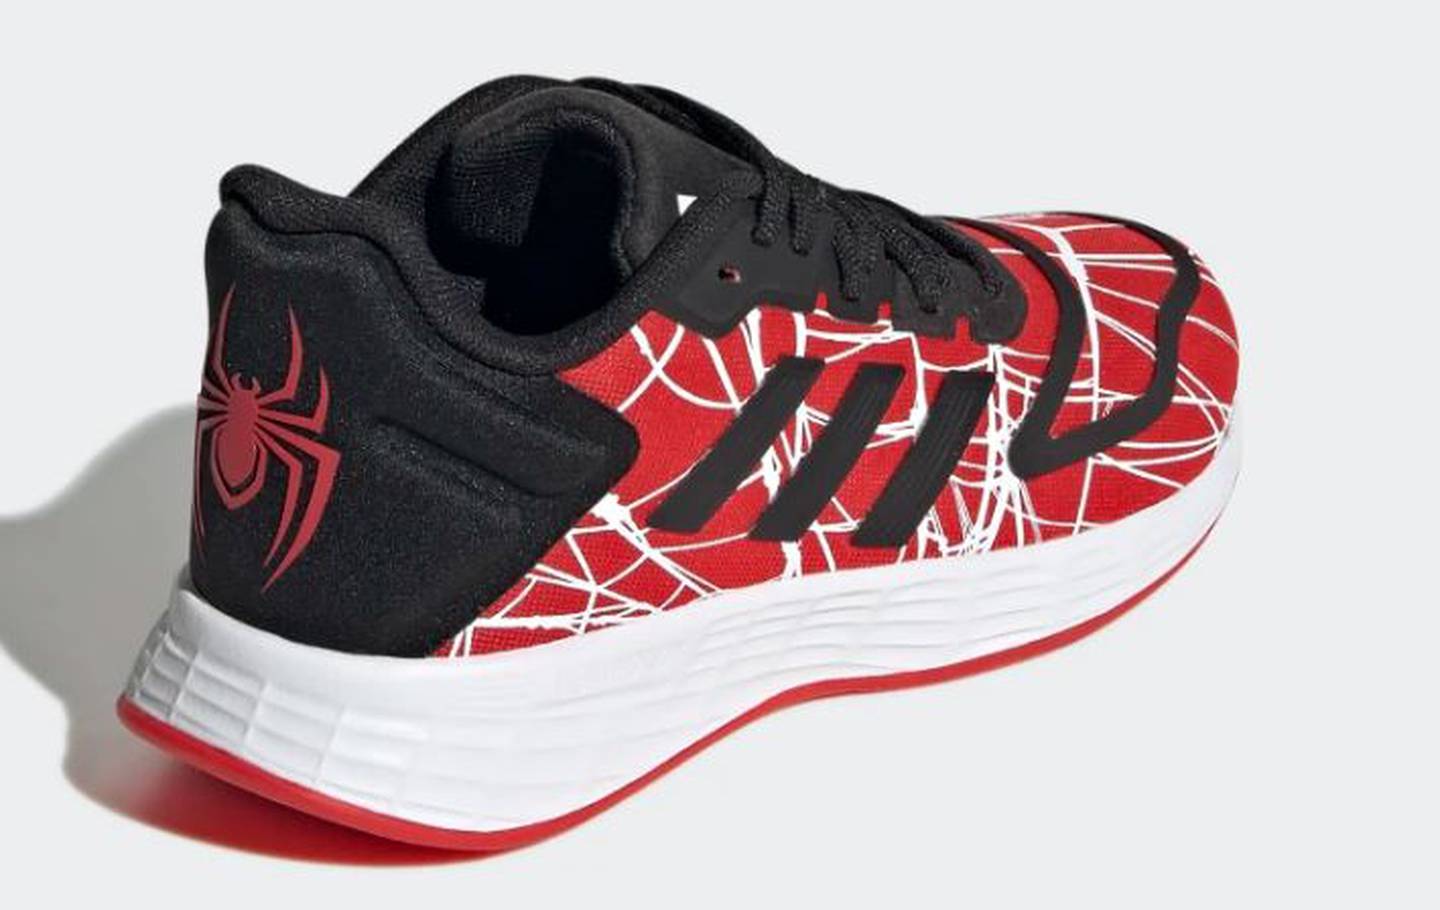 Adidas shoes inspired by Miles Morales.